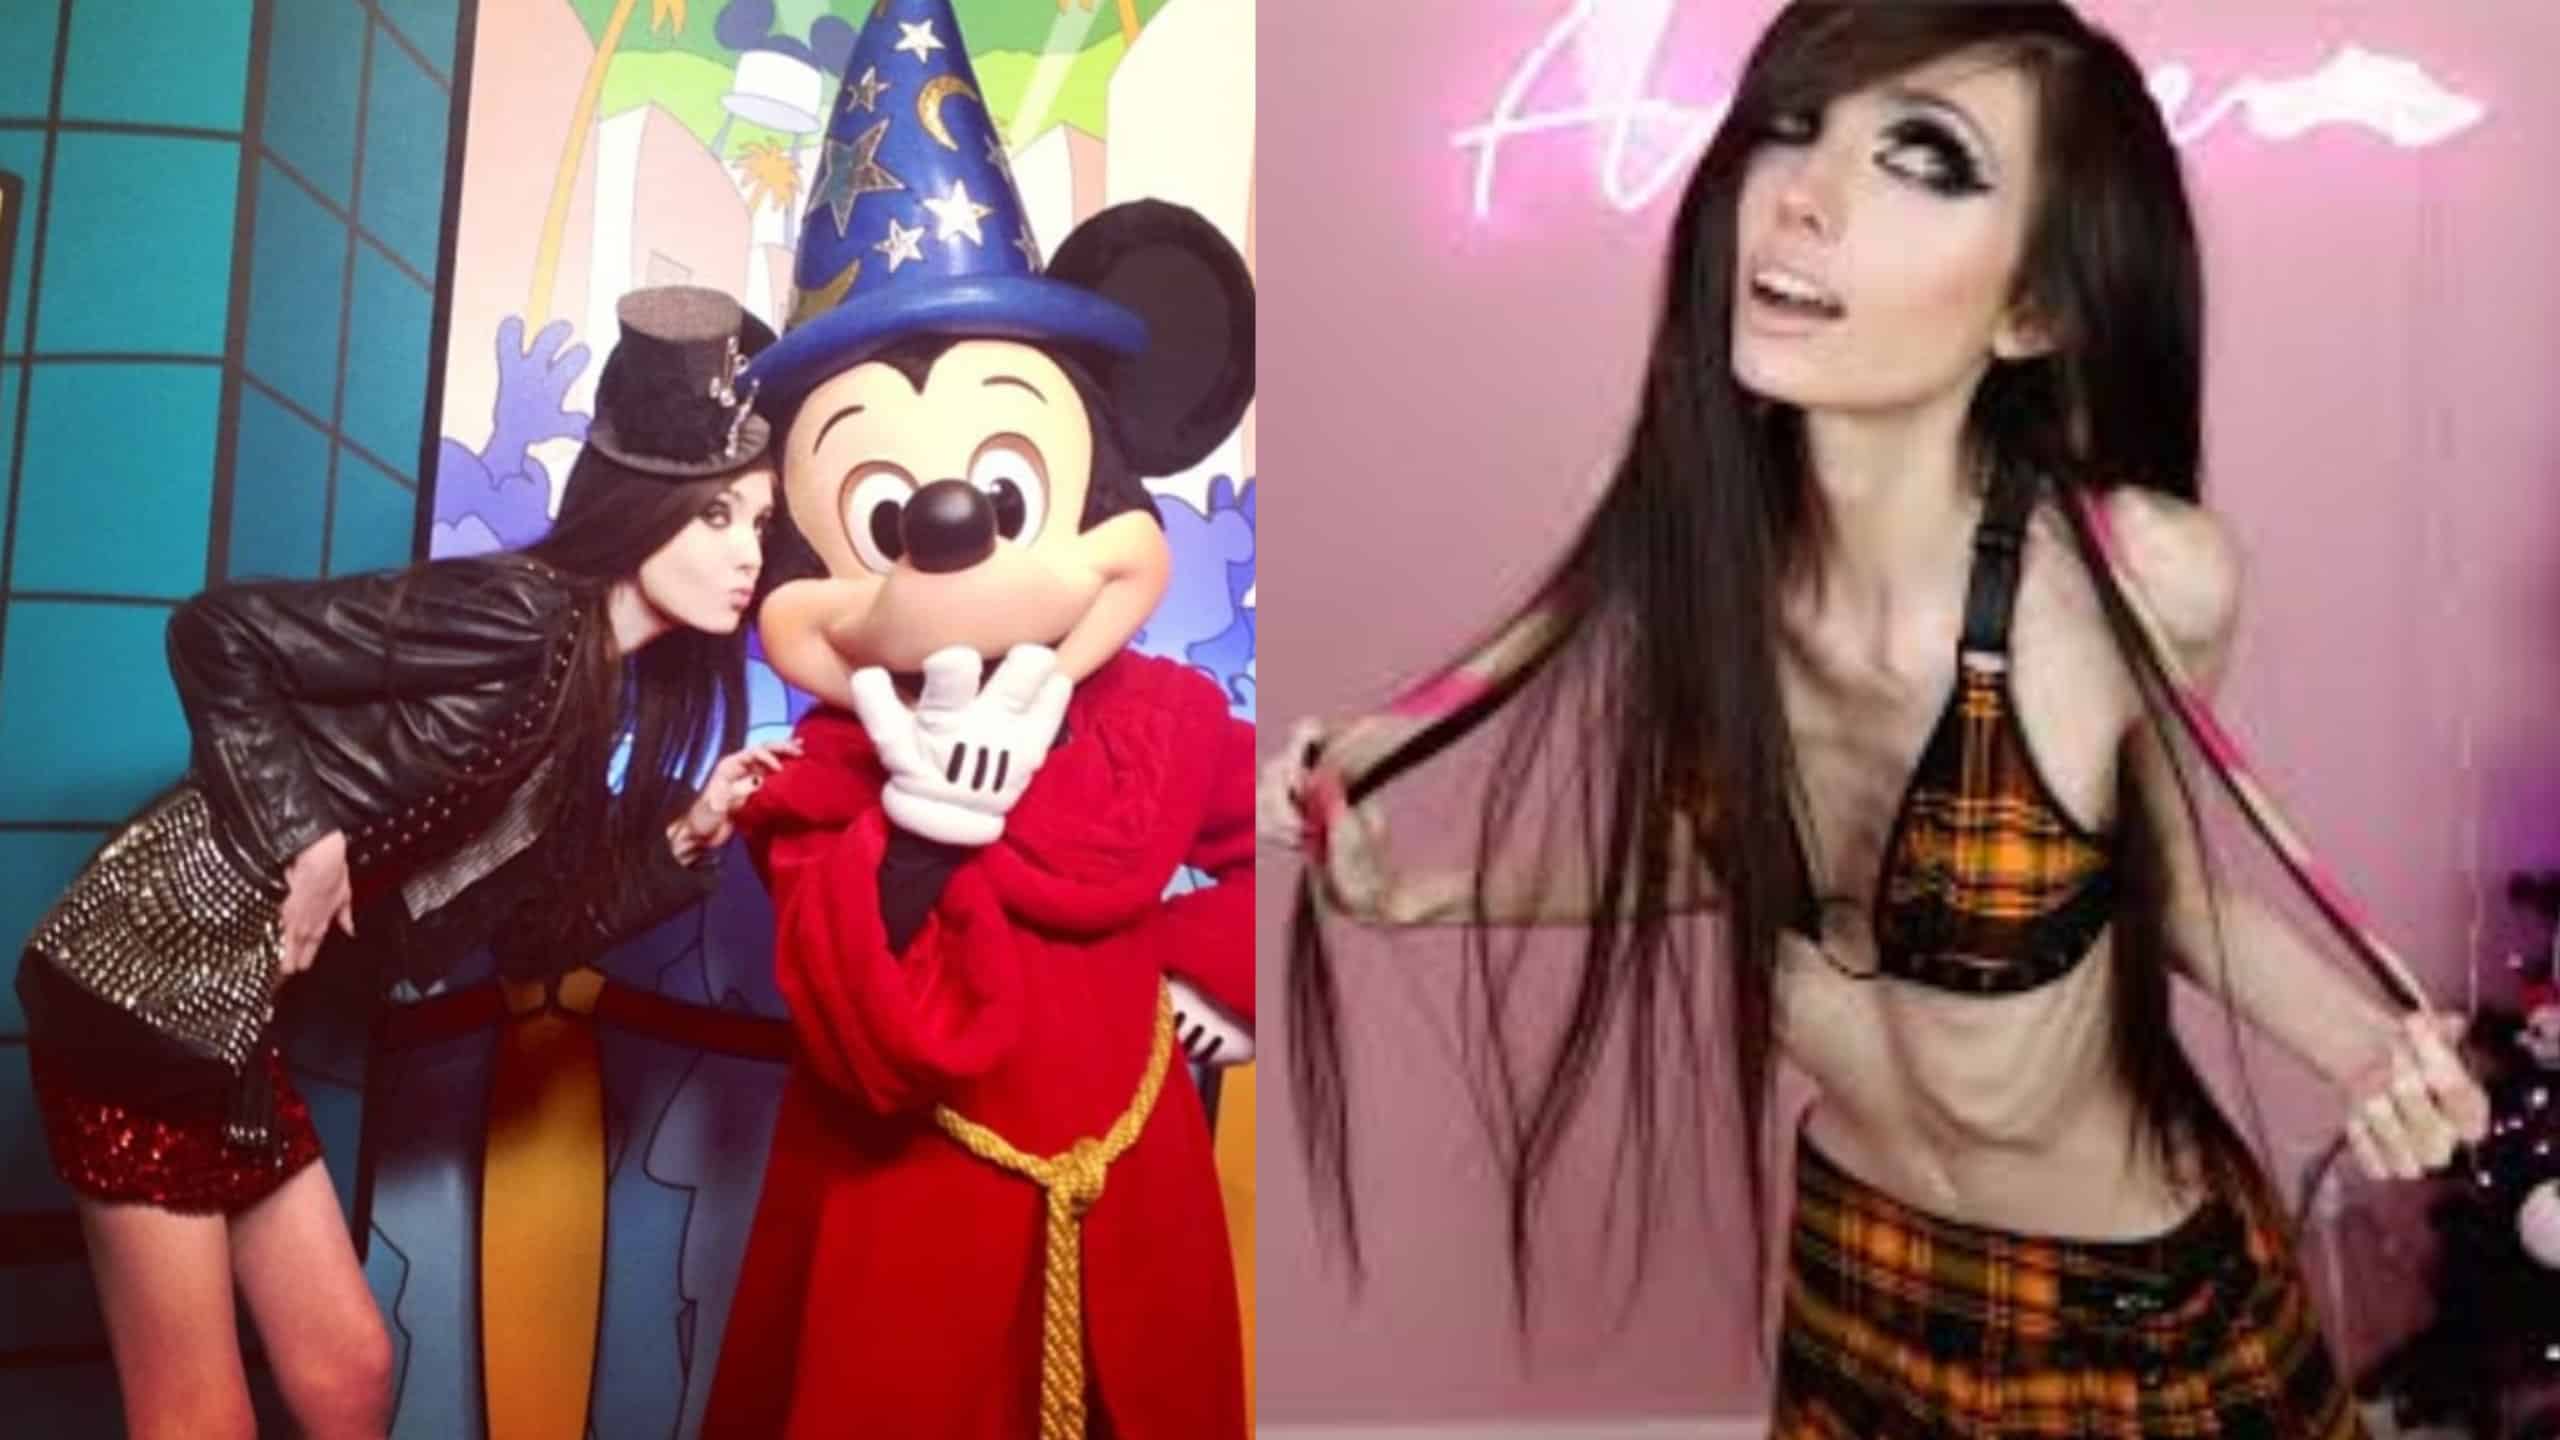 Eugenia Cooney before and after